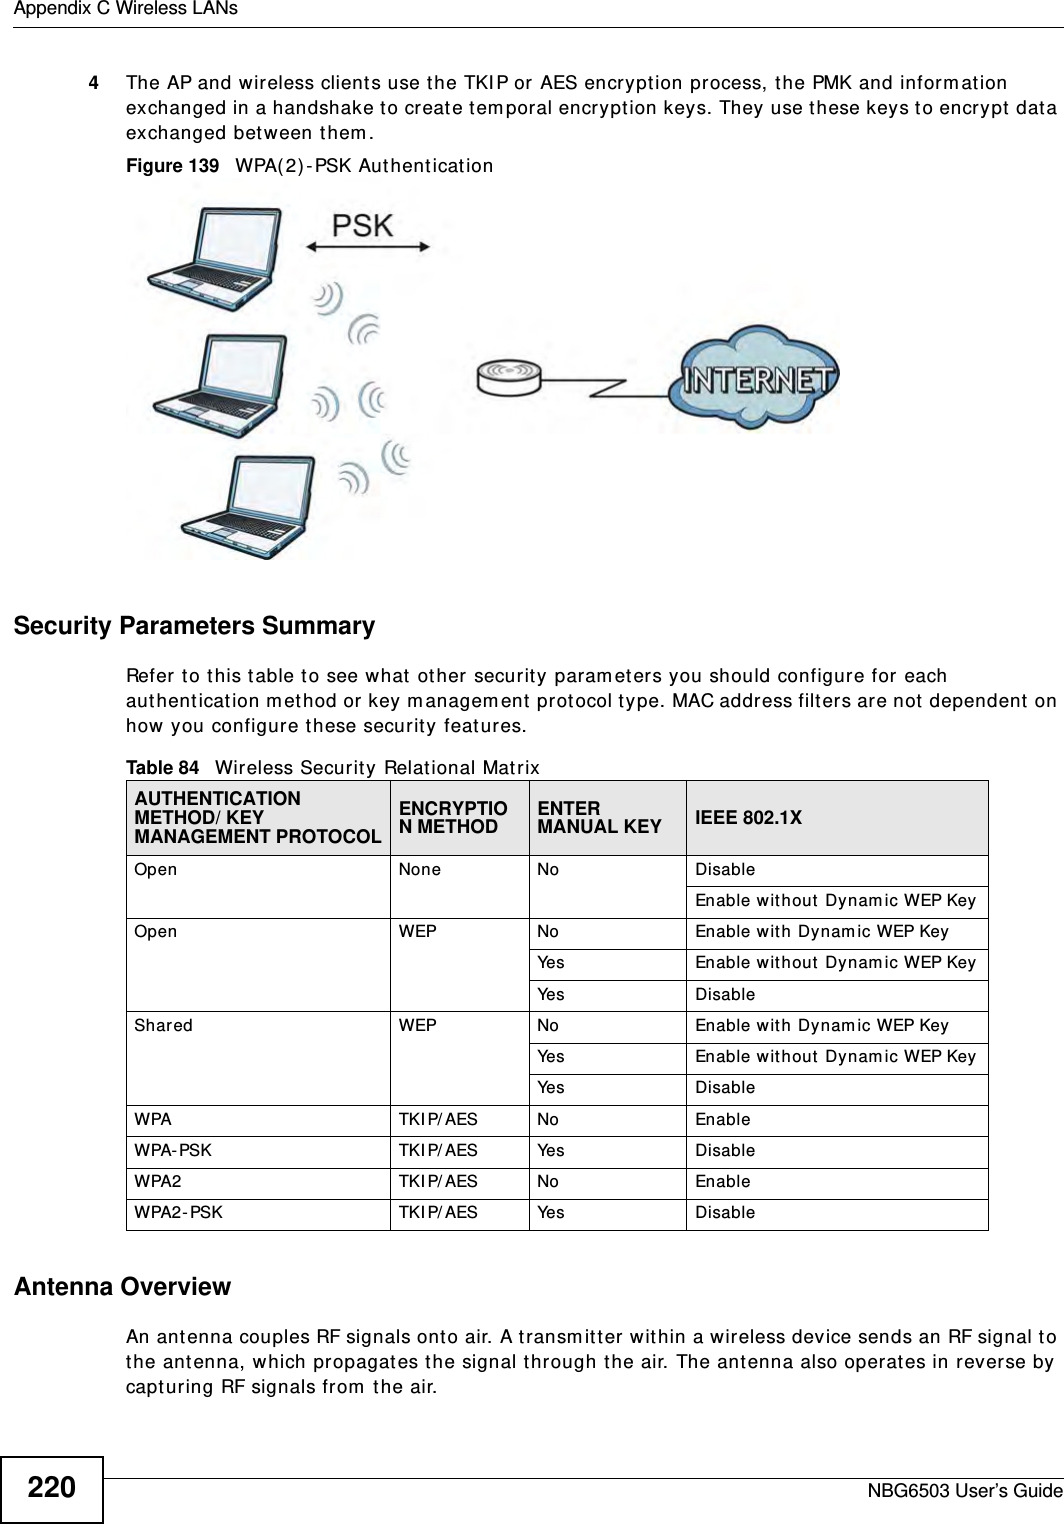 Appendix C Wireless LANsNBG6503 User’s Guide2204The AP and wireless clients use the TKIP or AES encryption process, the PMK and information exchanged in a handshake to create temporal encryption keys. They use these keys to encrypt data exchanged between them.Figure 139   WPA(2)-PSK AuthenticationSecurity Parameters SummaryRefer to this table to see what other security parameters you should configure for each authentication method or key management protocol type. MAC address filters are not dependent on how you configure these security features.Antenna OverviewAn antenna couples RF signals onto air. A transmitter within a wireless device sends an RF signal to the antenna, which propagates the signal through the air. The antenna also operates in reverse by capturing RF signals from the air. Table 84   Wireless Security Relational MatrixAUTHENTICATION METHOD/ KEY MANAGEMENT PROTOCOLENCRYPTION METHOD ENTER MANUAL KEY IEEE 802.1XOpen None No DisableEnable without Dynamic WEP KeyOpen WEP No           Enable with Dynamic WEP KeyYes Enable without Dynamic WEP KeyYes DisableShared WEP  No           Enable with Dynamic WEP KeyYes Enable without Dynamic WEP KeyYes DisableWPA  TKIP/AES No EnableWPA-PSK  TKIP/AES Yes DisableWPA2 TKIP/AES No EnableWPA2-PSK  TKIP/AES Yes Disable